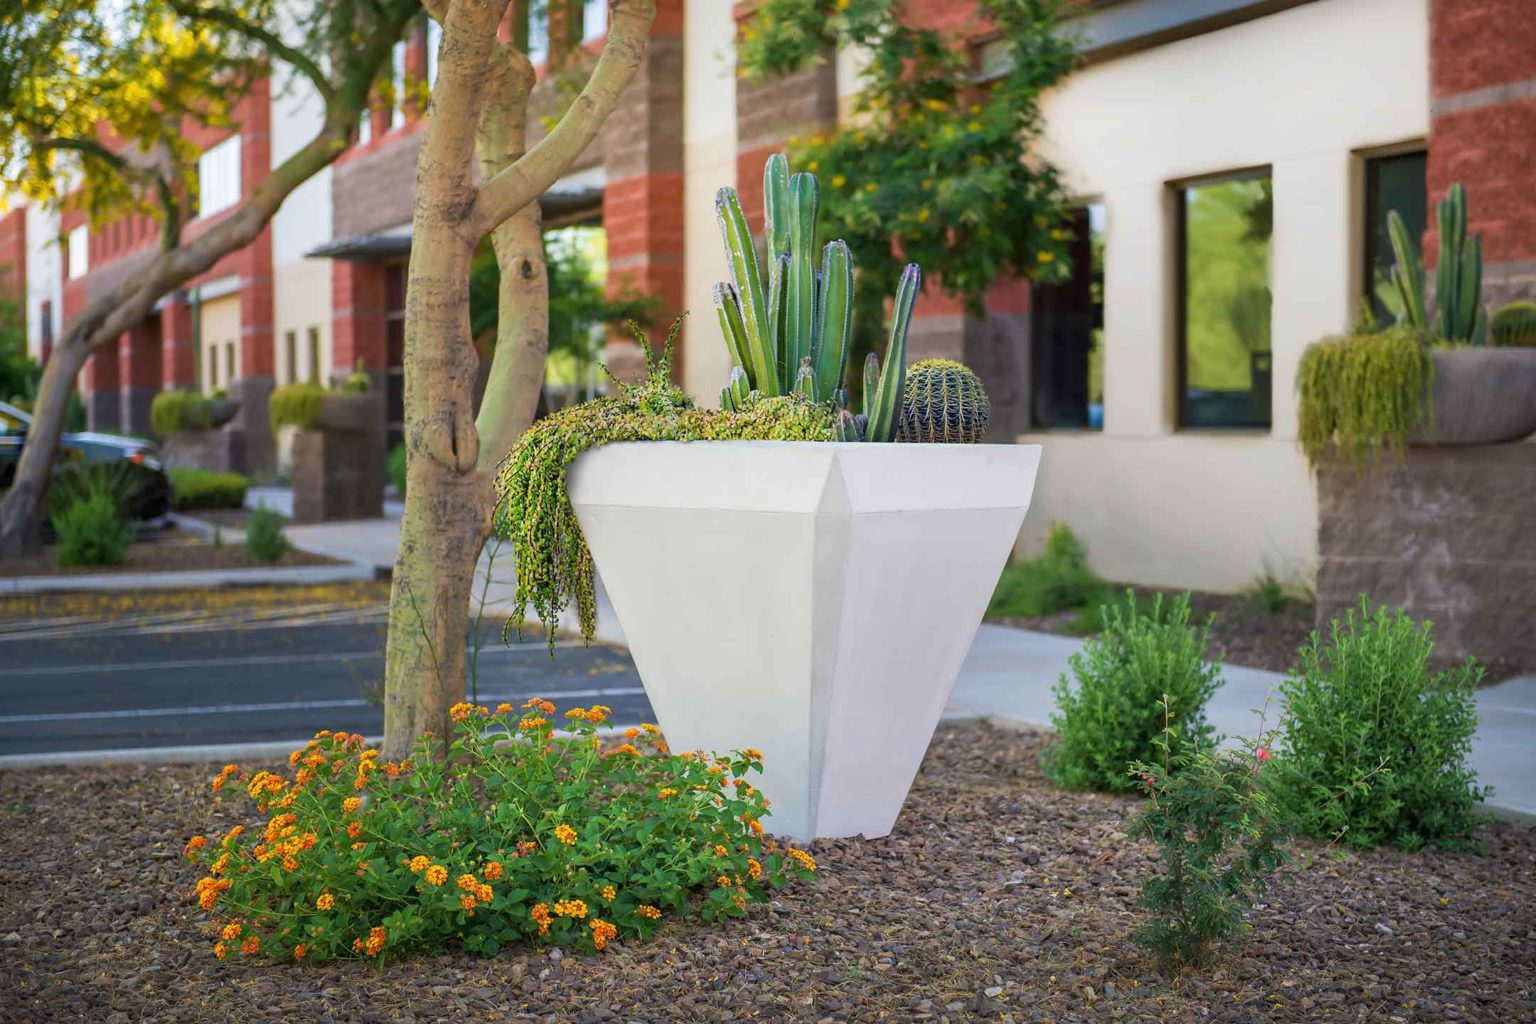 photo of PebbleTec Fire and Water Patio Planter Bowls in Arizona landscape setting